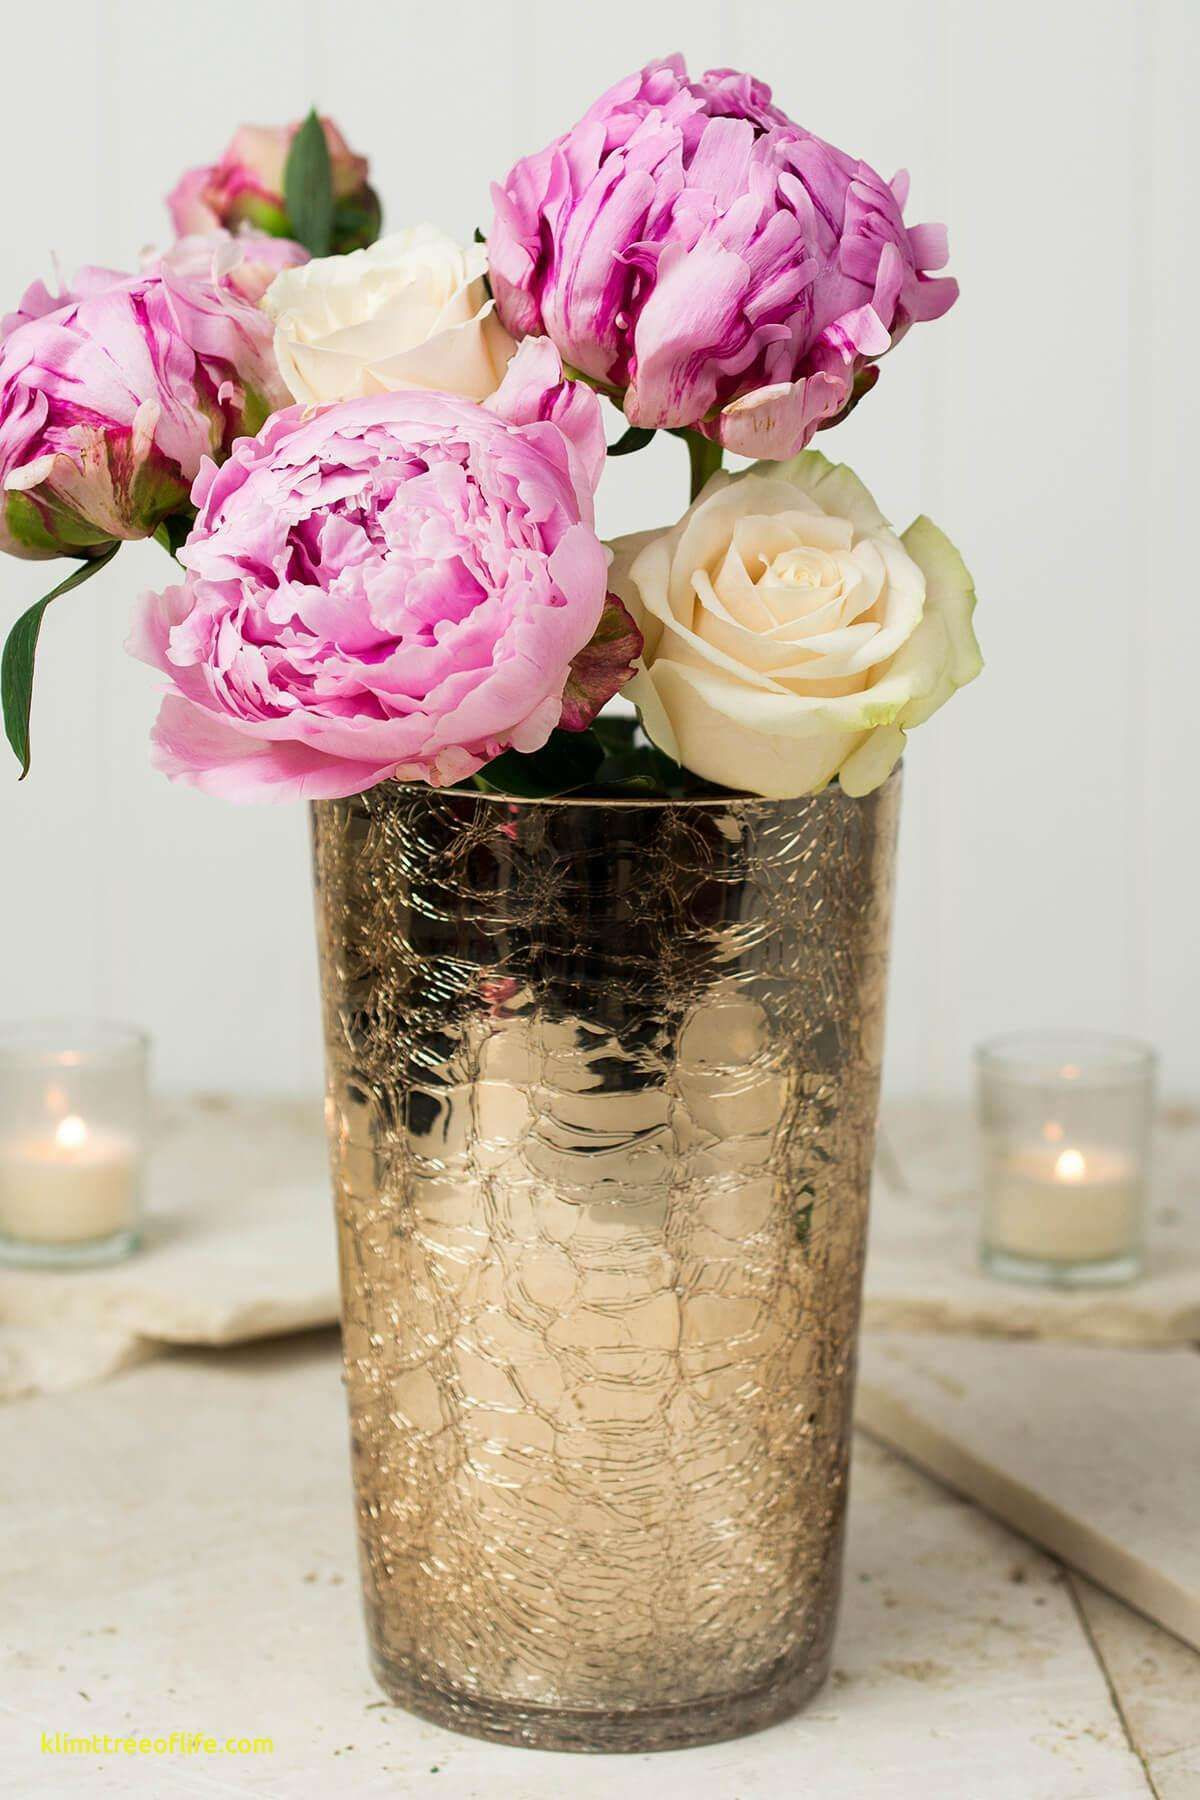 21 Fashionable Low Square Vase 2024 free download low square vase of 19 glass bouquet vases the weekly world with regard to 41 elegant flower arrangement ideas image